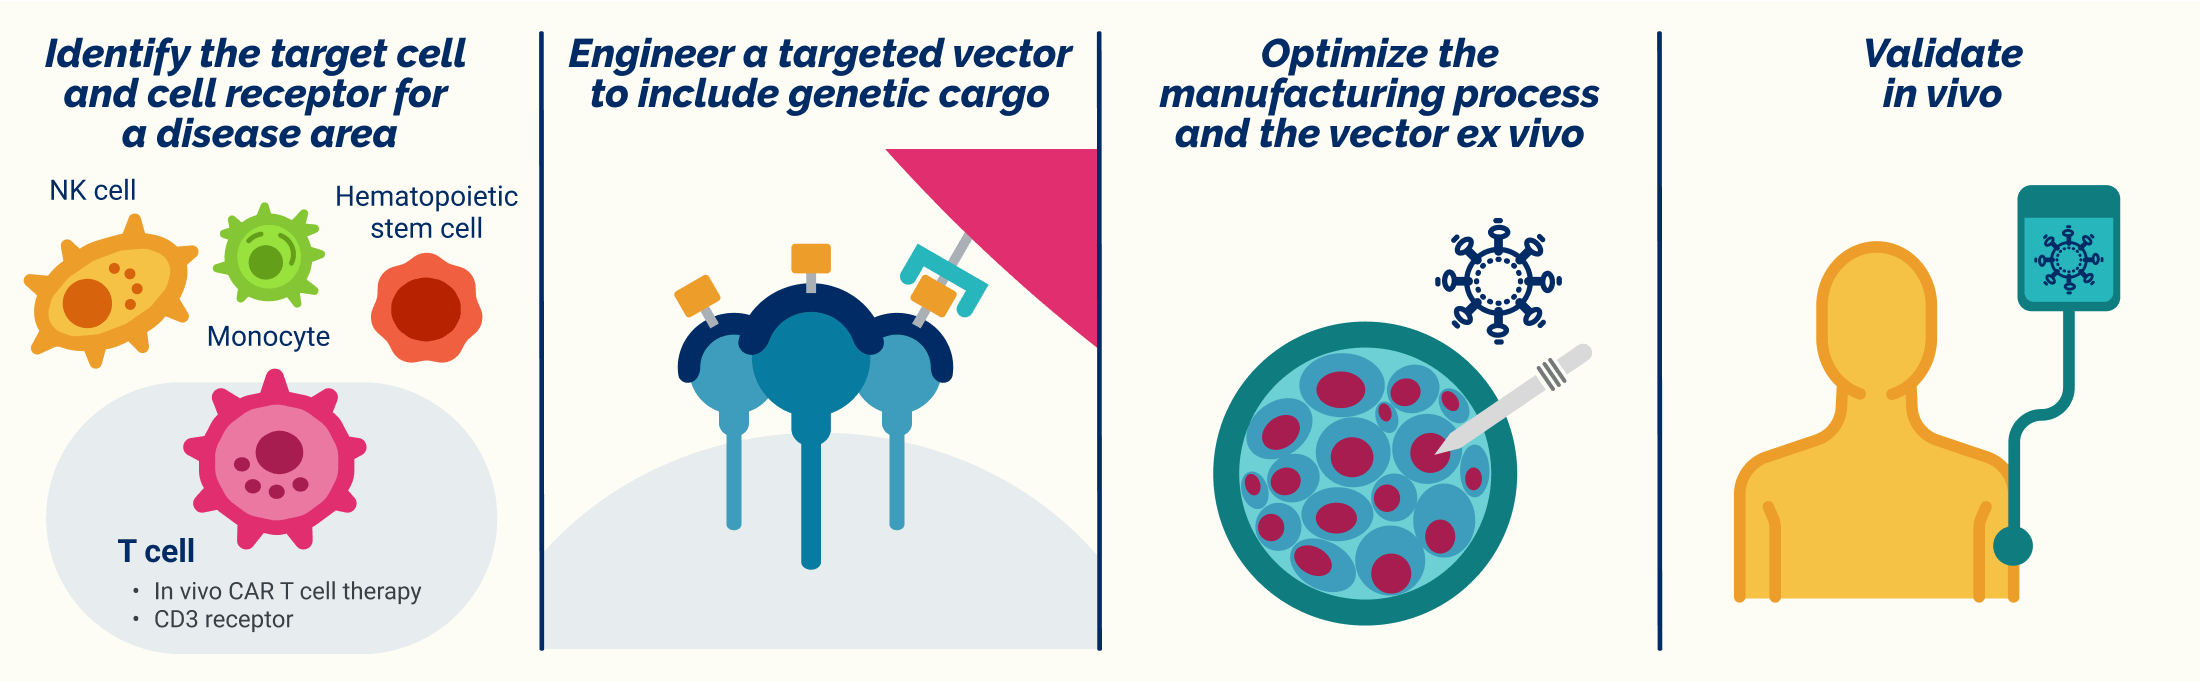 Identify the target cell and cell receptor for a disease area. Engineer a targeted vector to include genetic cargo. Optimize the manufacturing process and the vector ex vivo. Validate in vivo.